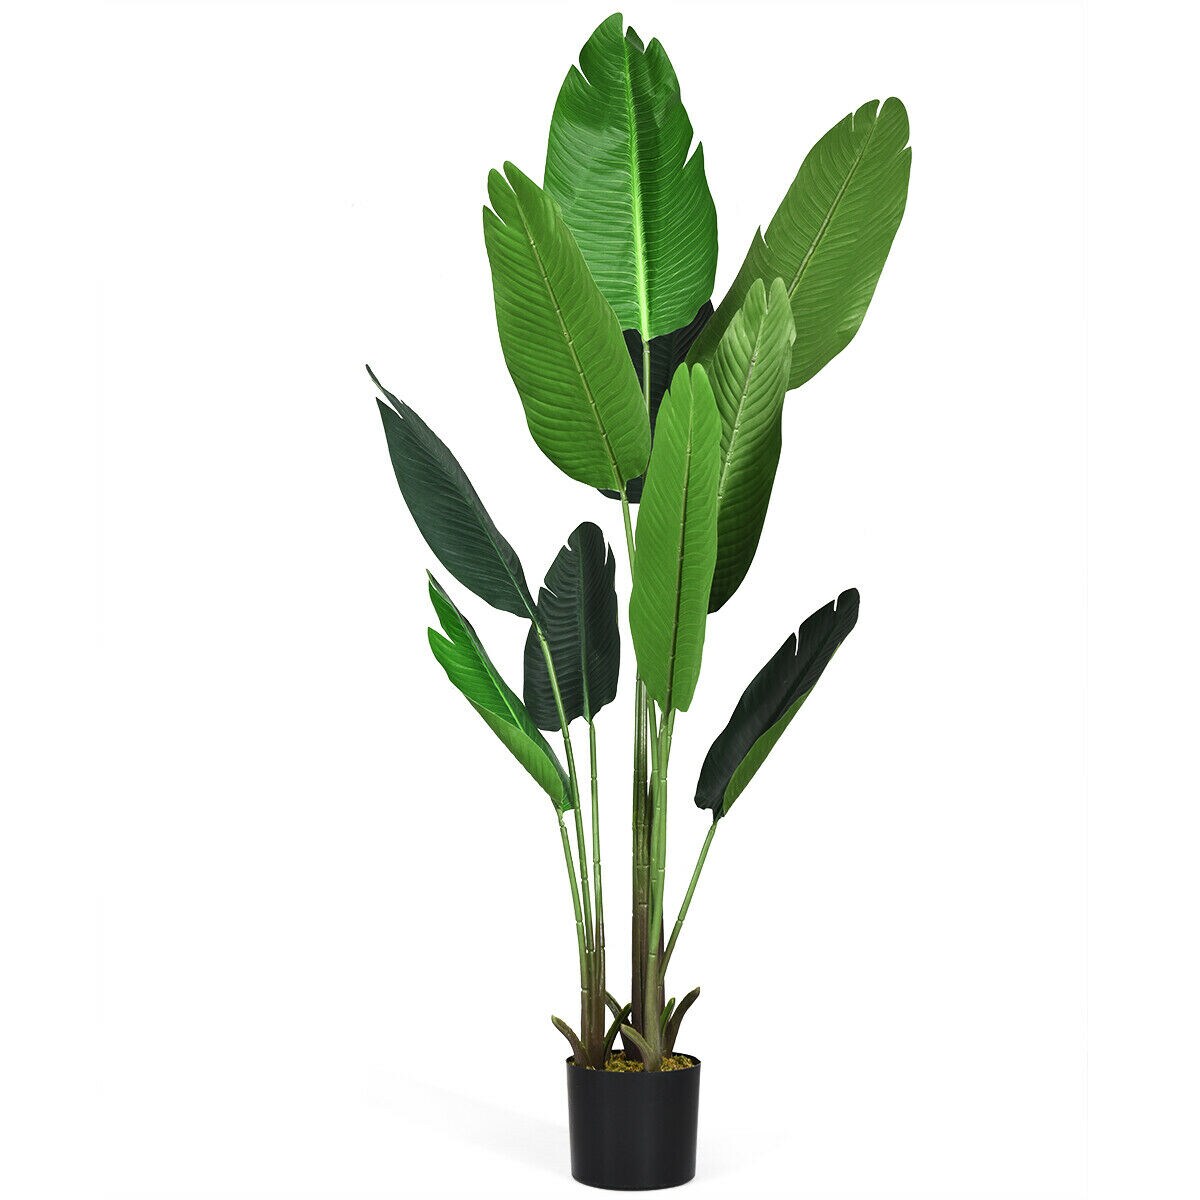 Gymax 5.3ft Artificial Tropical Palm Tree Green Indoor-Outdoor Home Decorative Planter